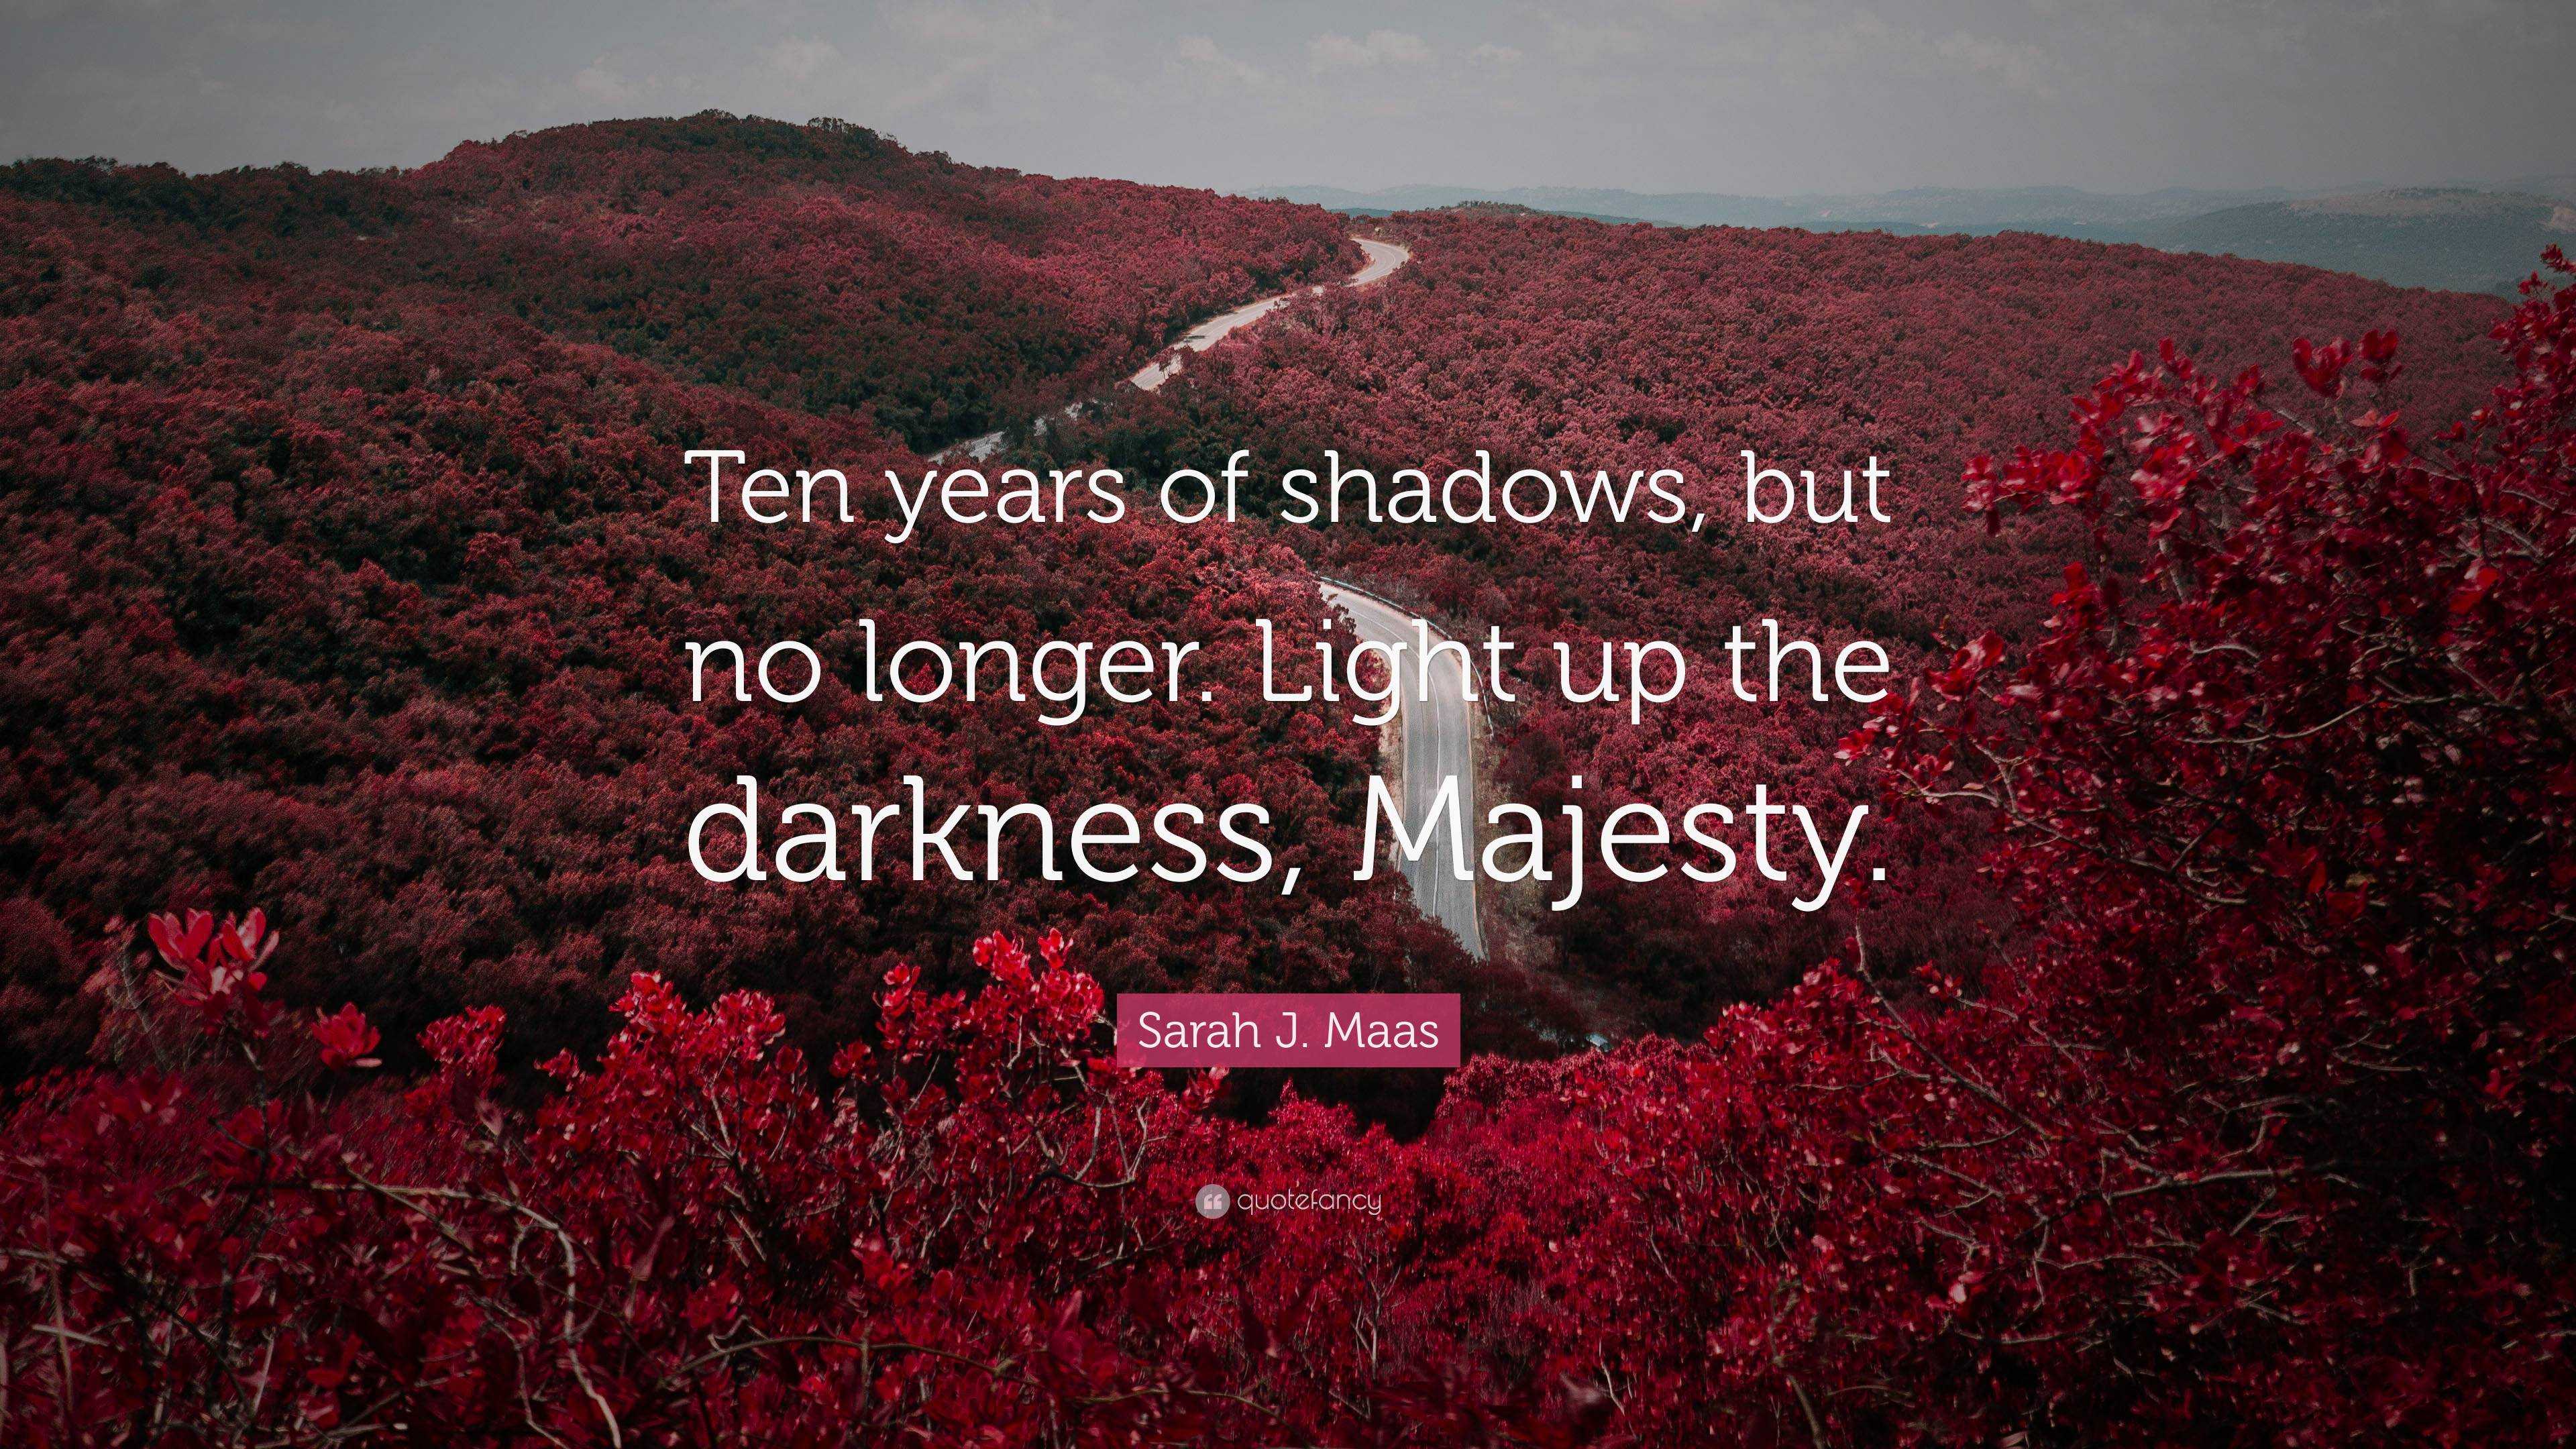 Sarah J Maas Quote “ten Years Of Shadows But No Longer Light Up The Darkness Majesty ”